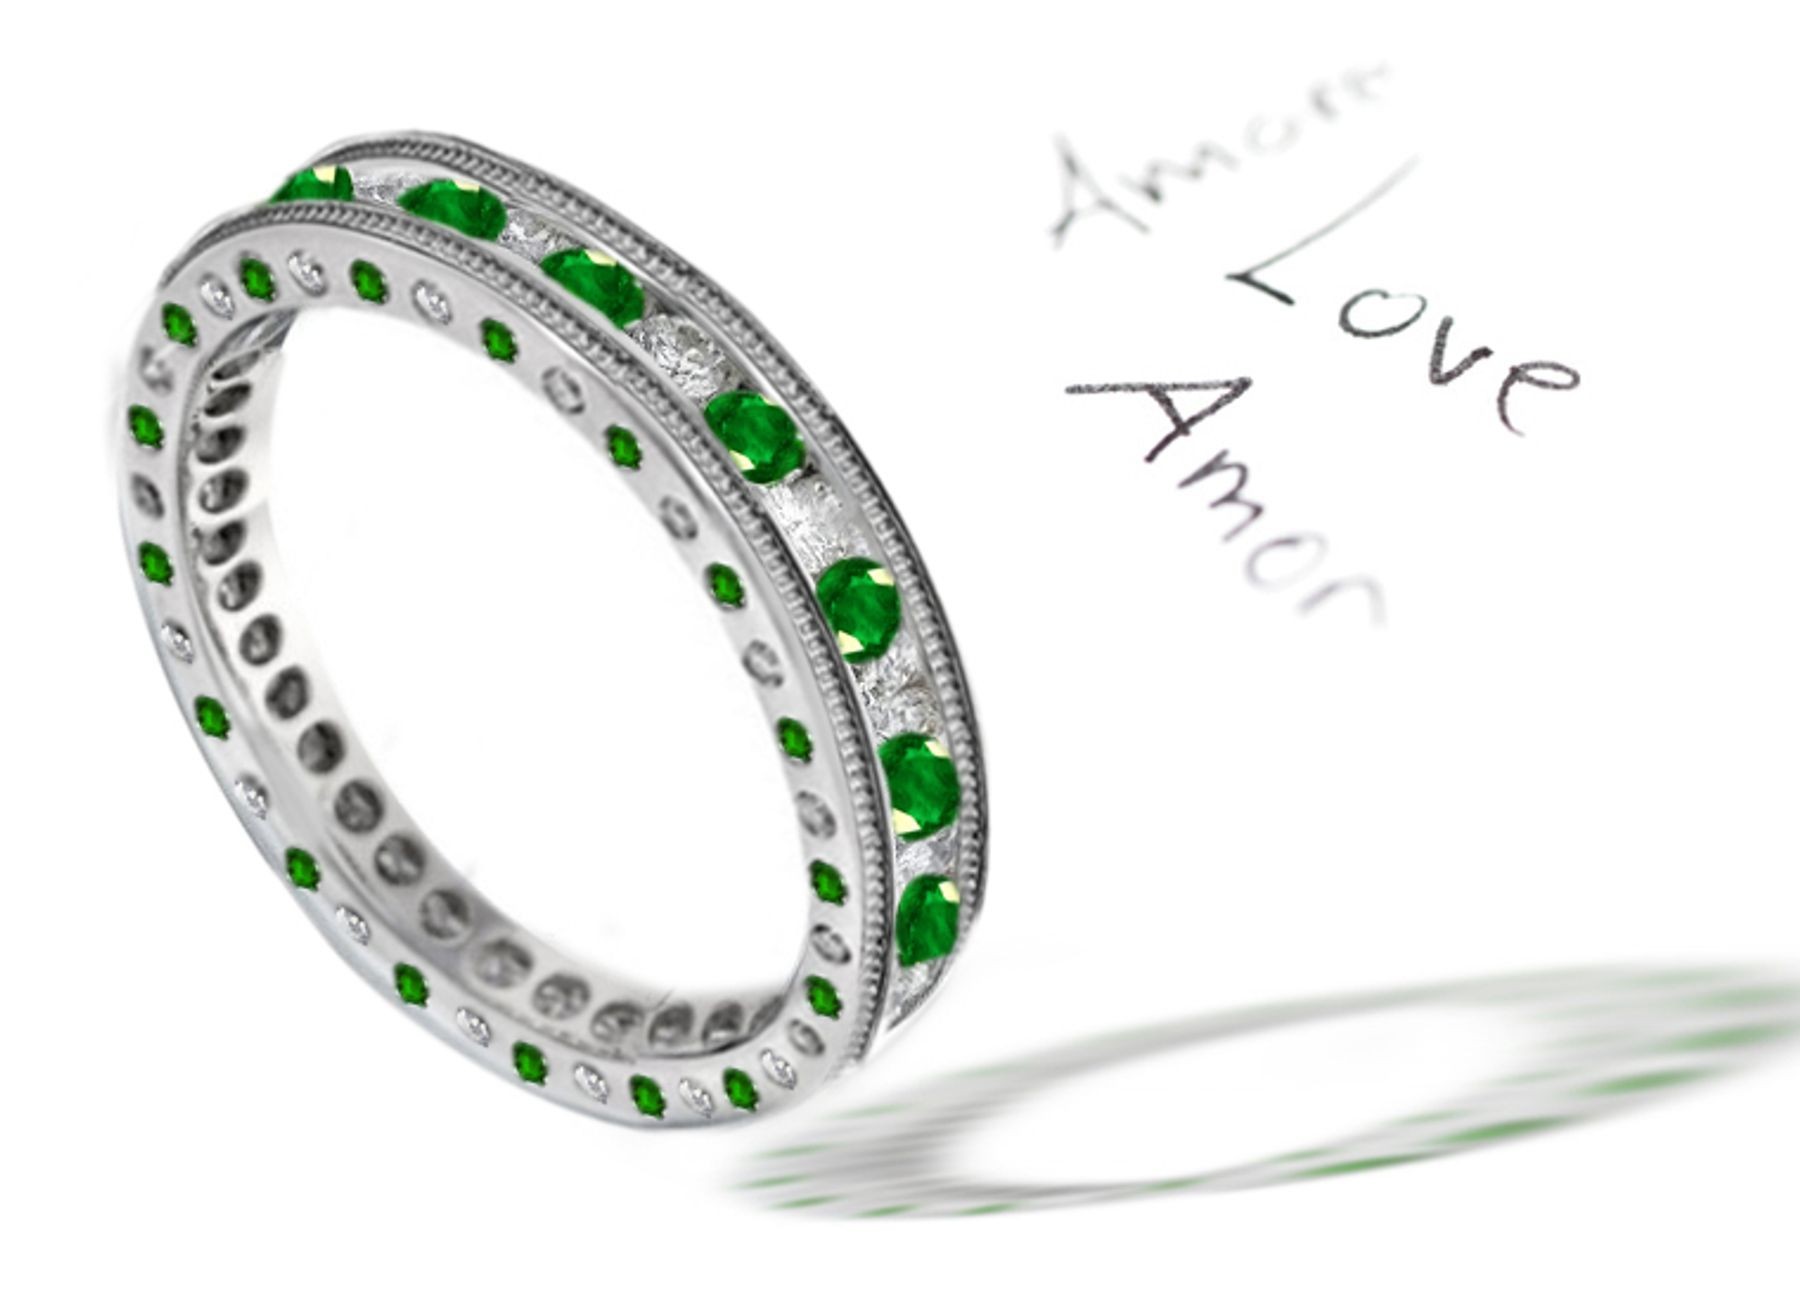 "Intricate Detailing Design": Rich Emerald Diamond Eternity Wedding Ring Reflected in Yellow Appear Green